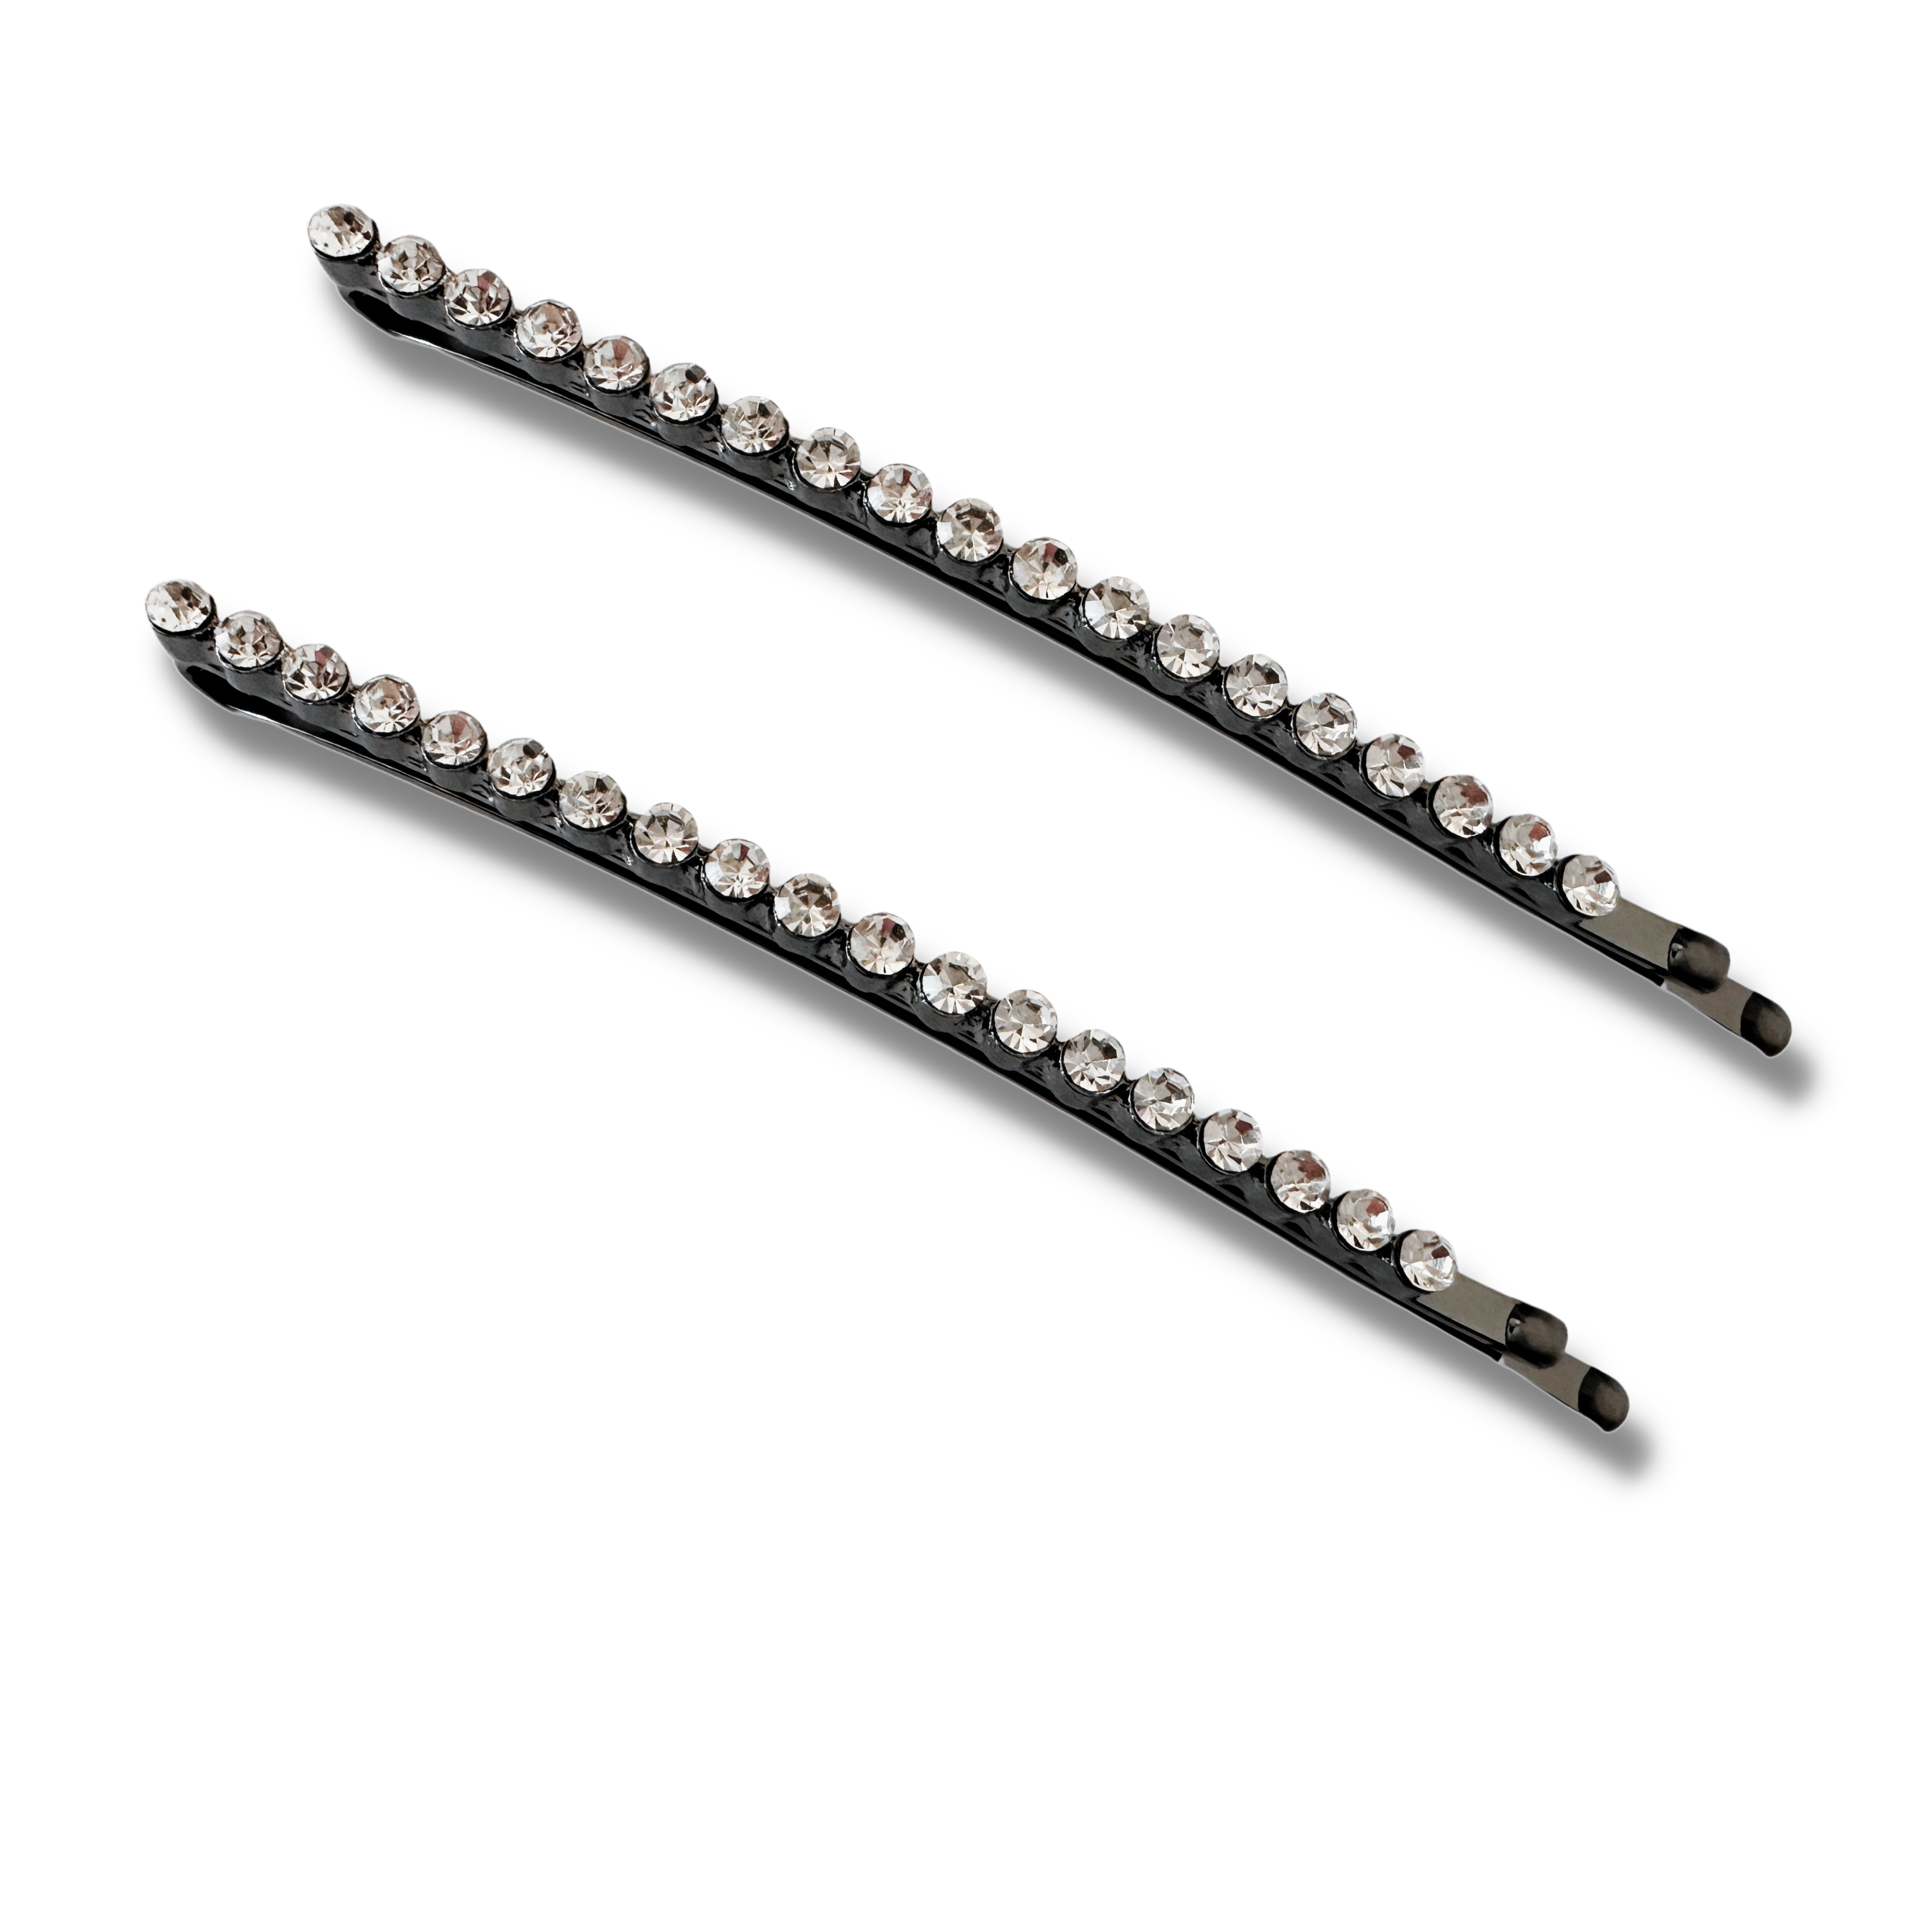 Mia Beauty Long Curved Rhinestone Bobby Pins in black metal with clear stones